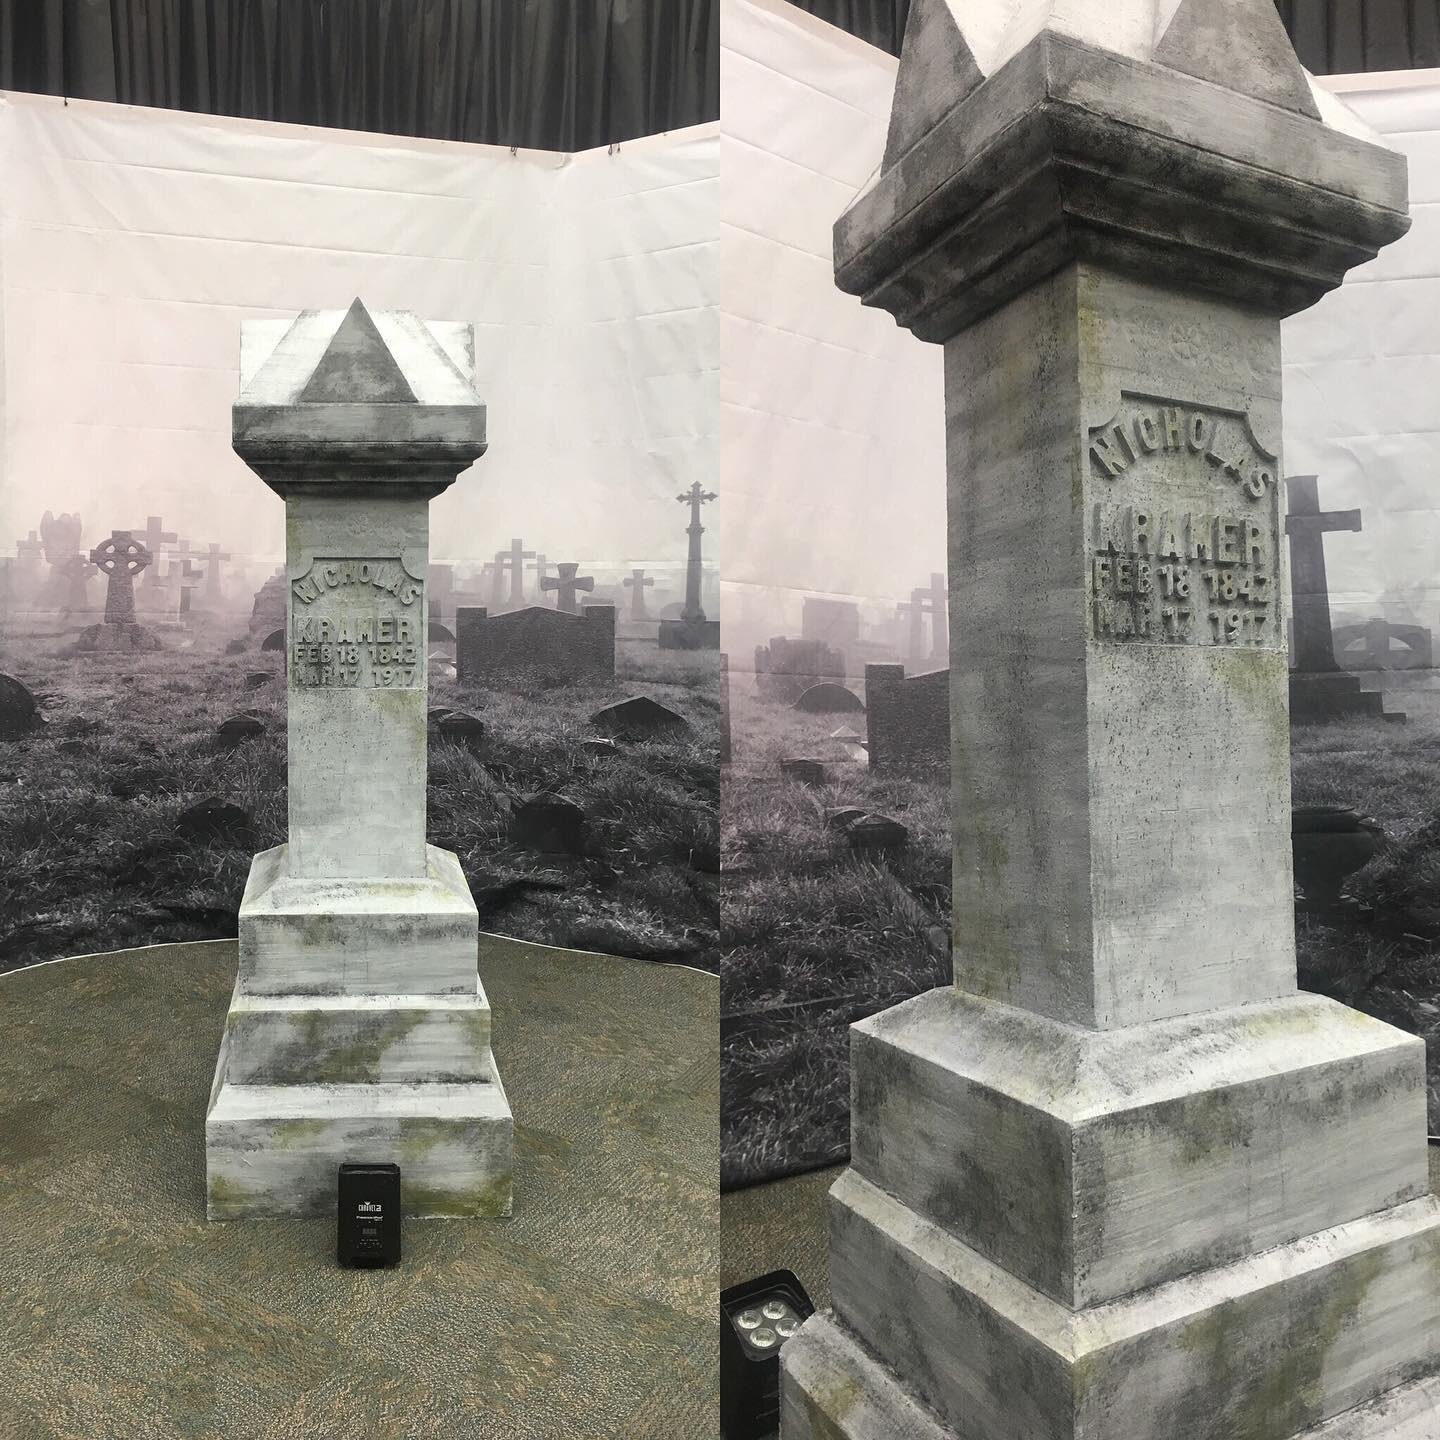 We are very proud to be able to share our latest project we created in collaboration with @visionaryeffects A replica tombstone from Night of the Living Dead, commissioned by @scarehouse for the #livingwiththedead Party - celebrating the George A. Ro